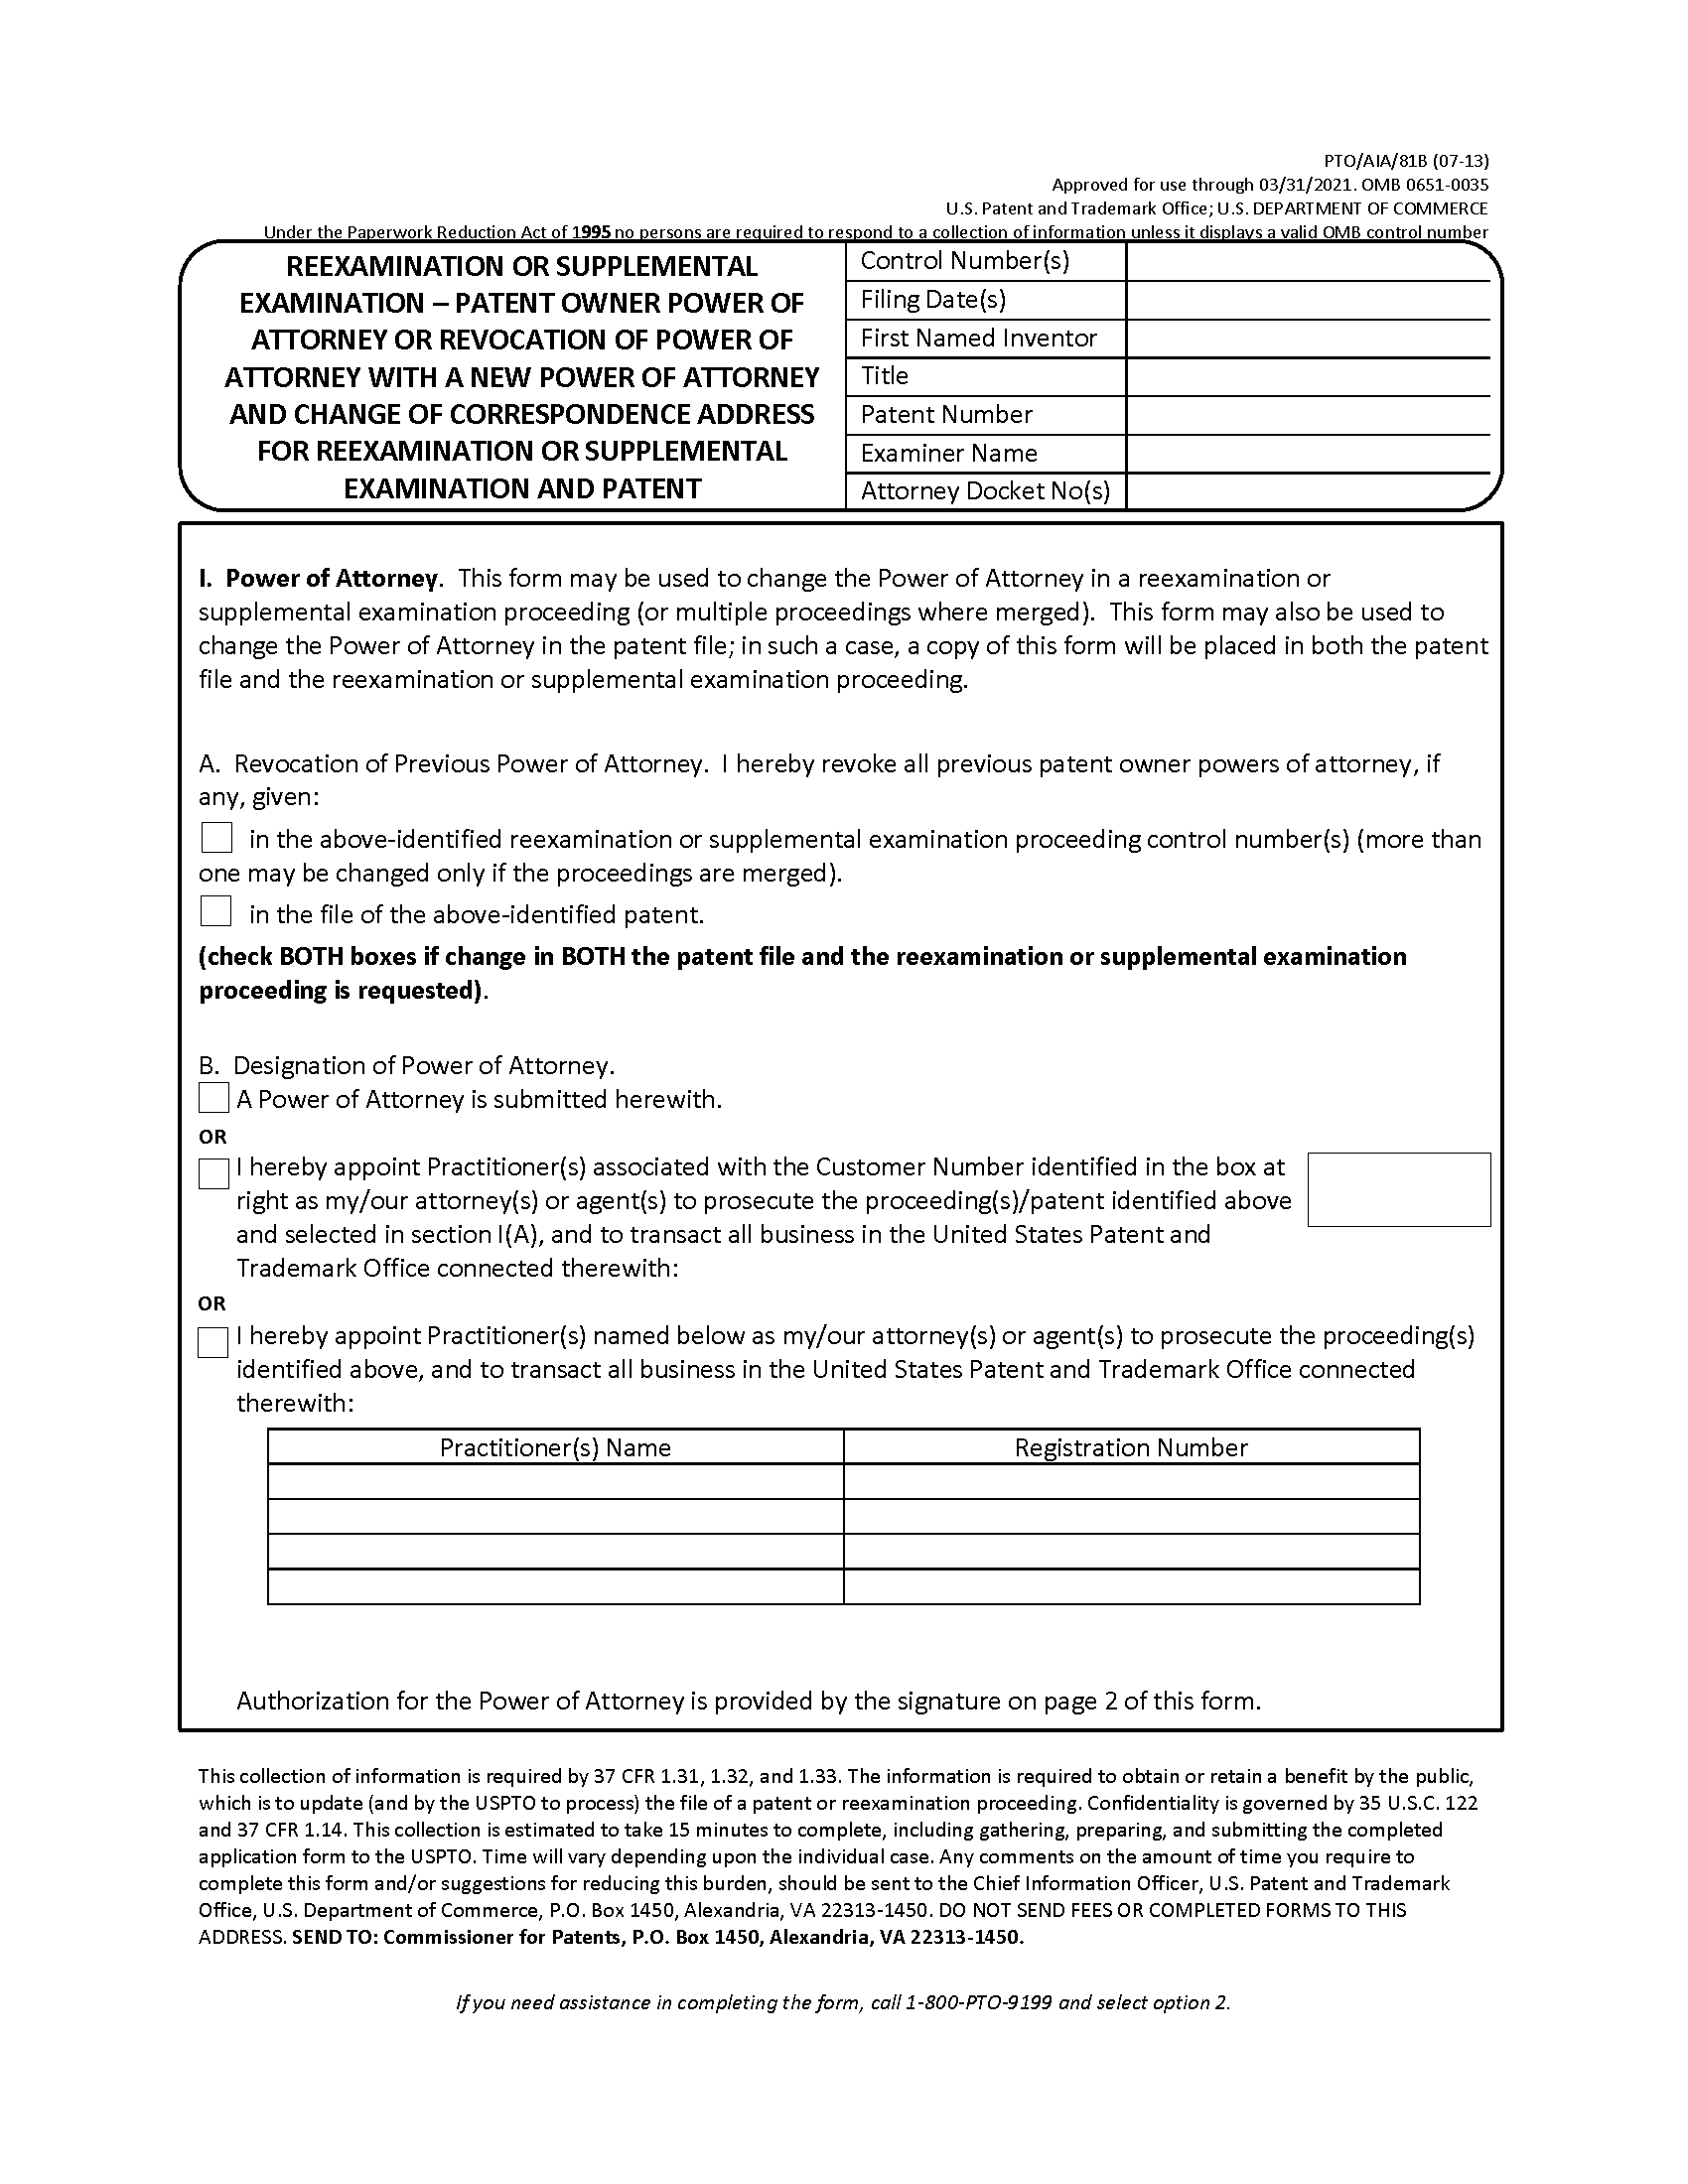 PTO/AIA/81B. Reexamination or Supplemental Examination - Patent Owner Power of Attorney or Revocation of Power of Attorney with a New Power of Attorney and Change of Correspondence Address (Page 1 of 2)